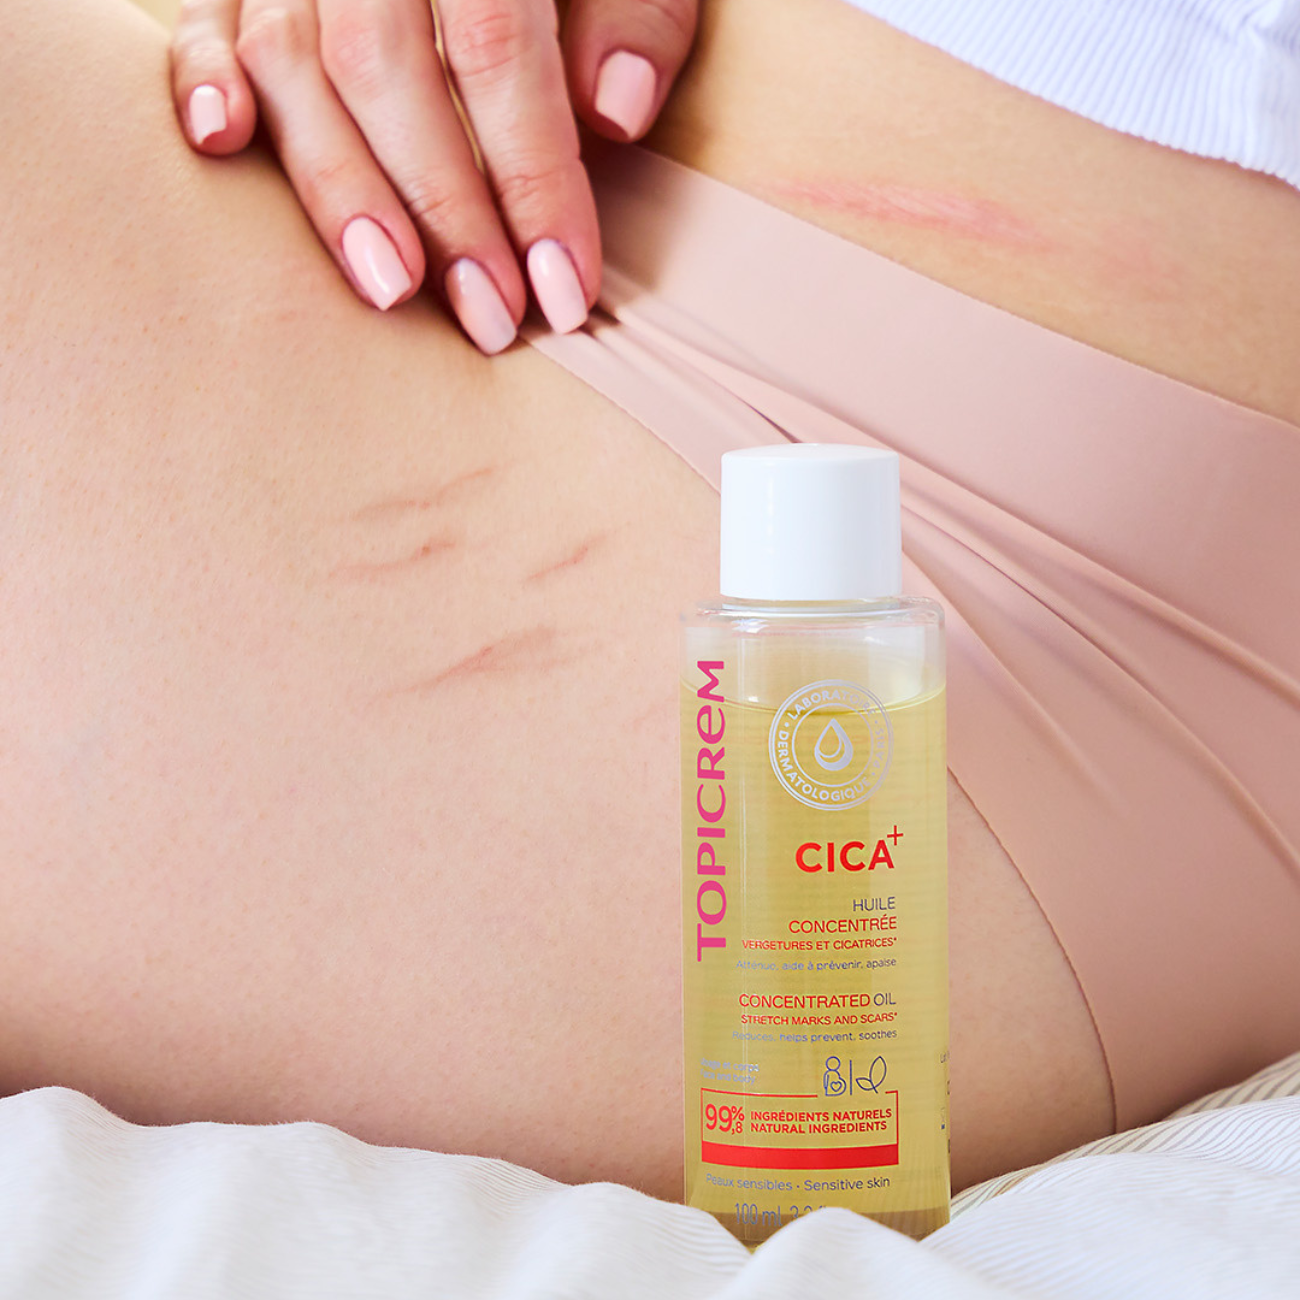 CONCENTRATED OIL FOR STRETCH MARKS AND SCARS - CICA+